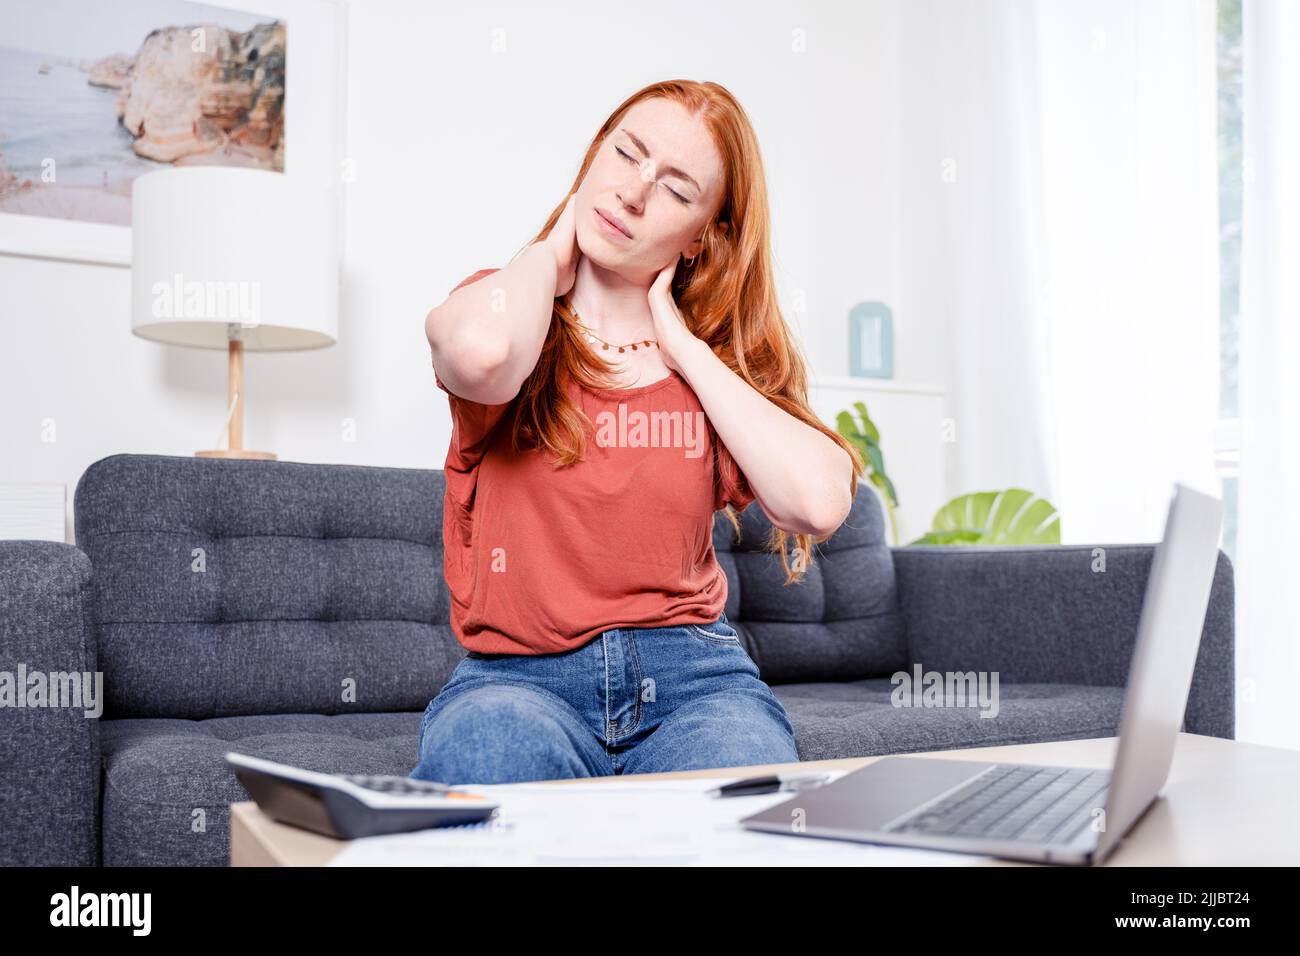 Woman suffering cervical pain with bad working posture Stock Photo